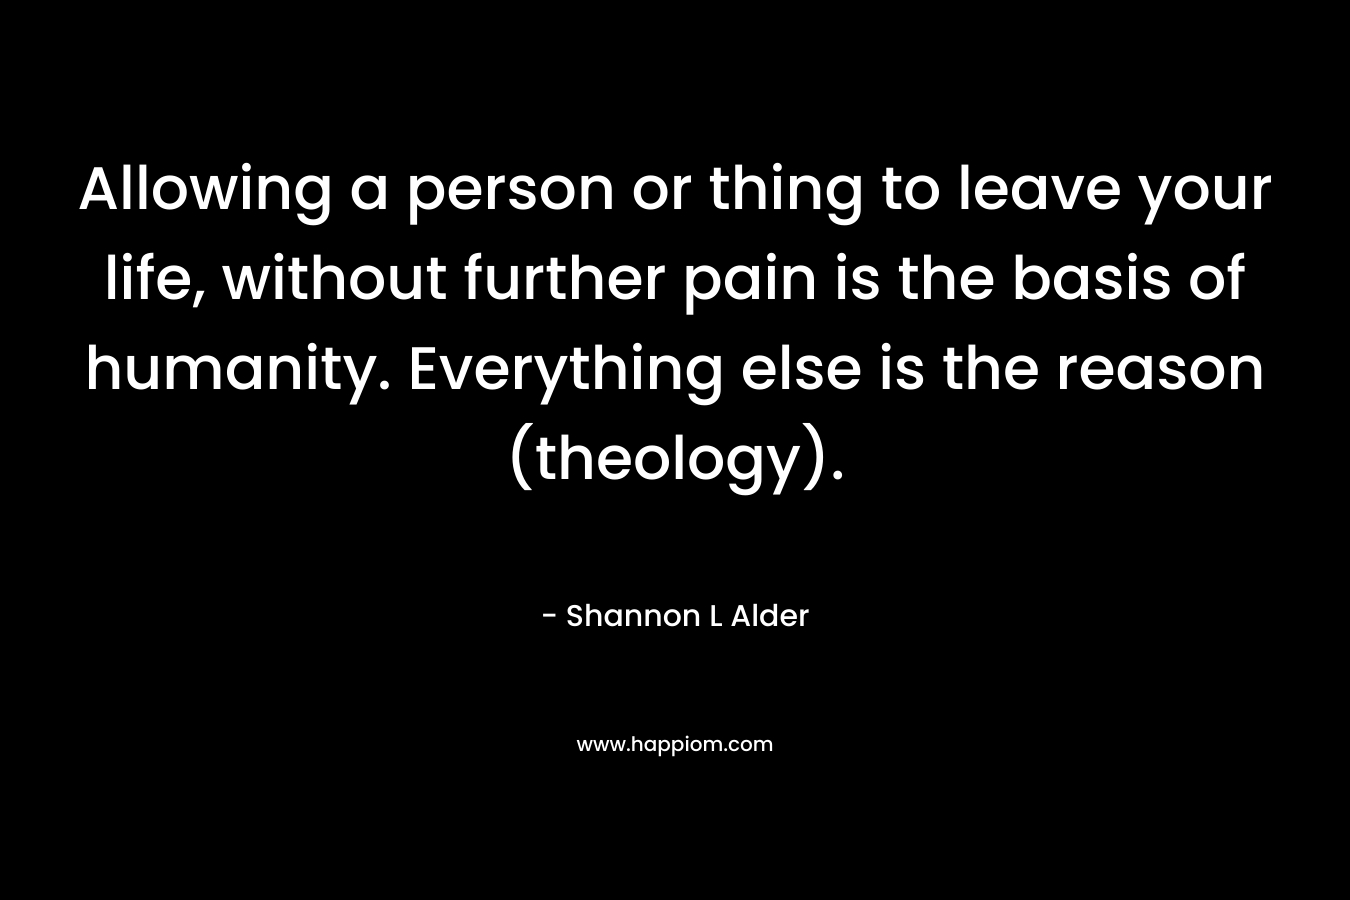 Allowing a person or thing to leave your life, without further pain is the basis of humanity. Everything else is the reason (theology).